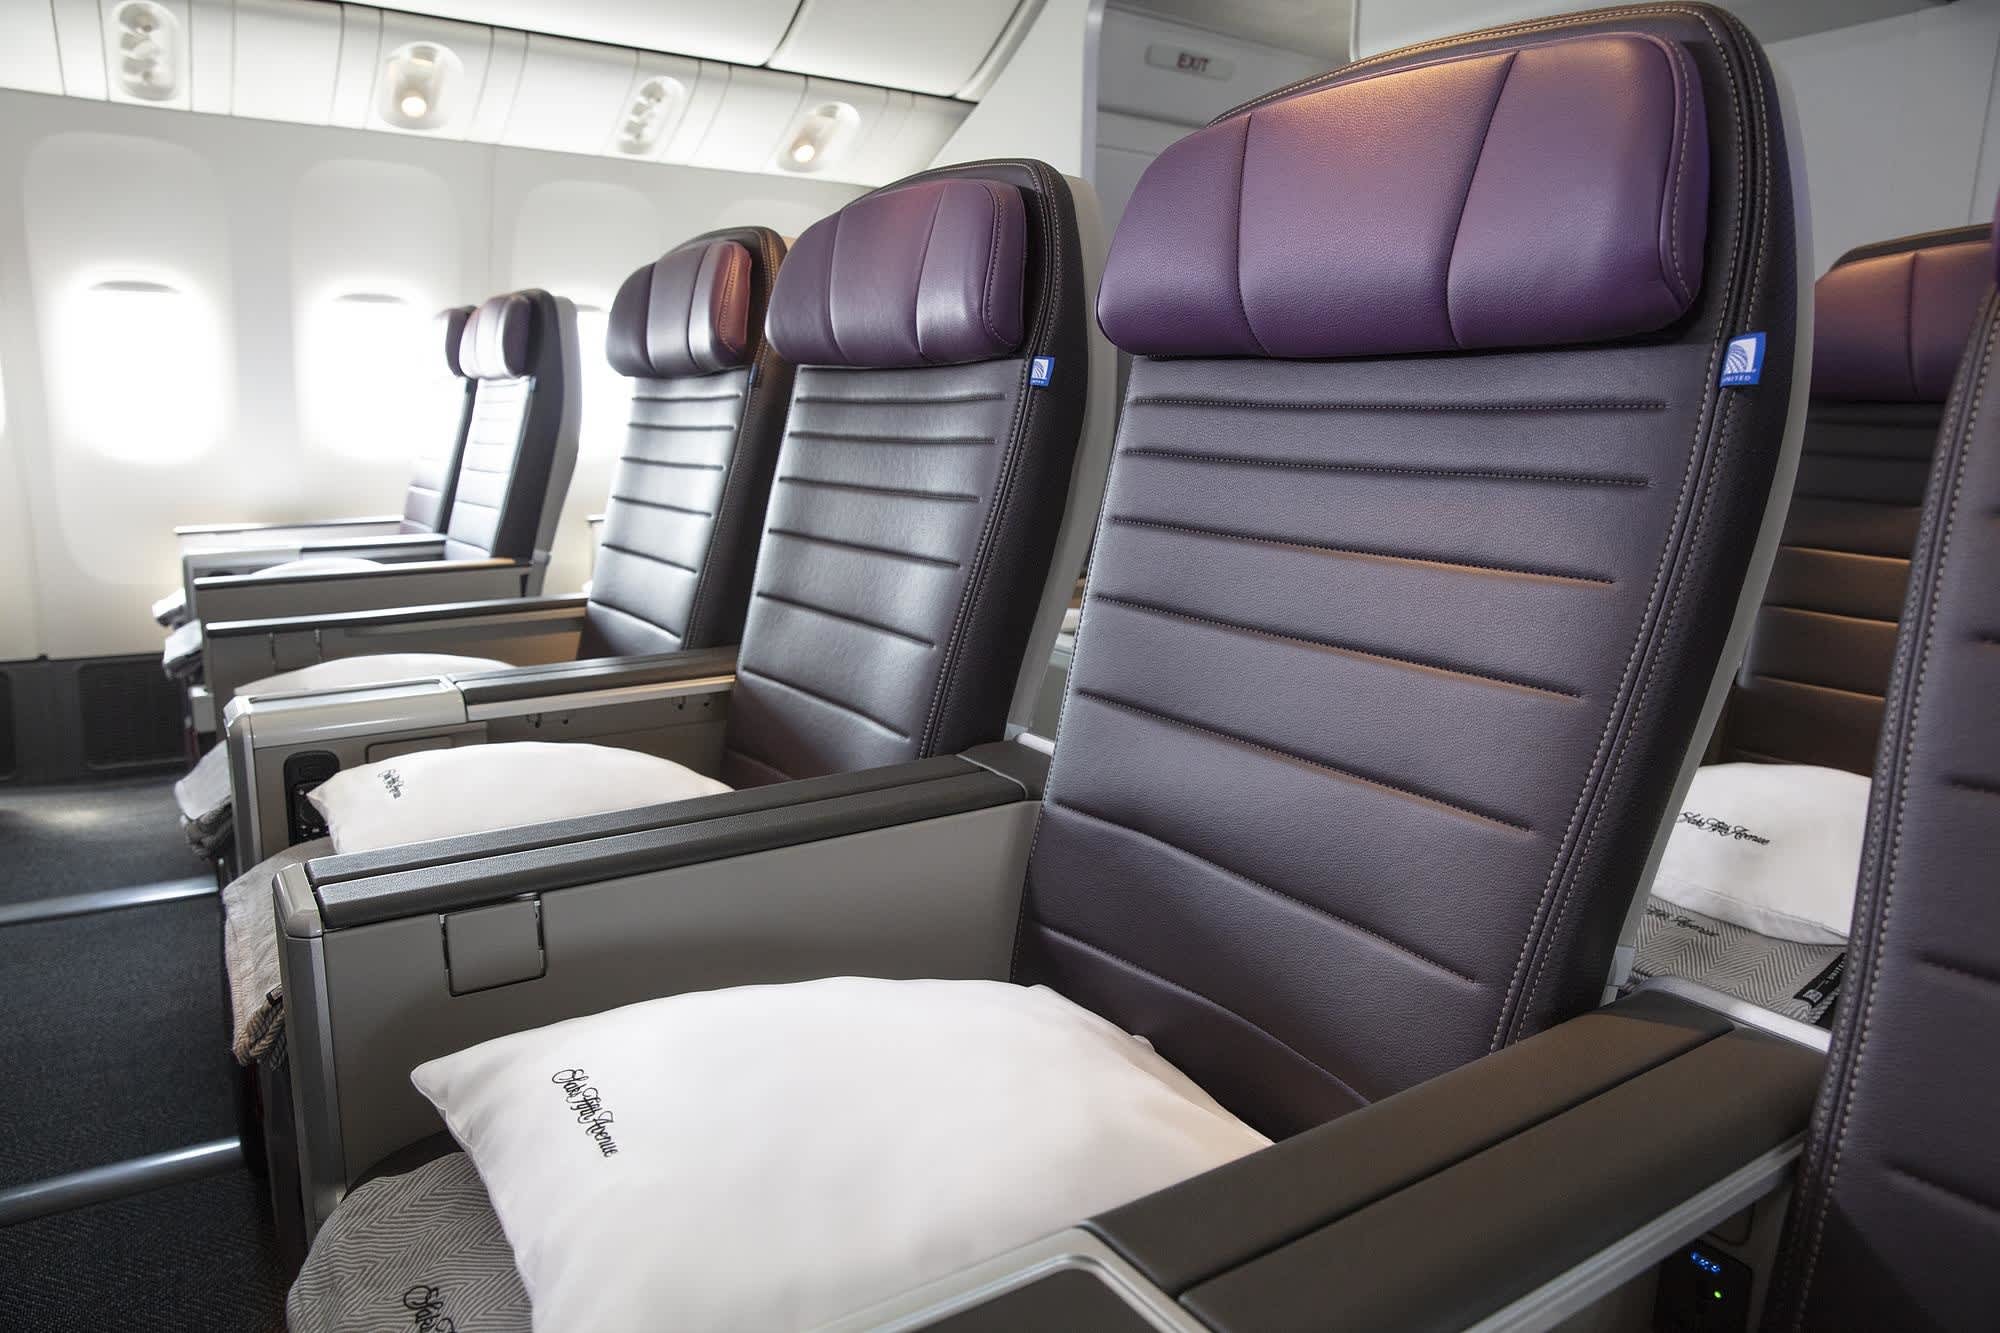 united-airlines-starts-selling-tickets-in-new-premium-economy-class